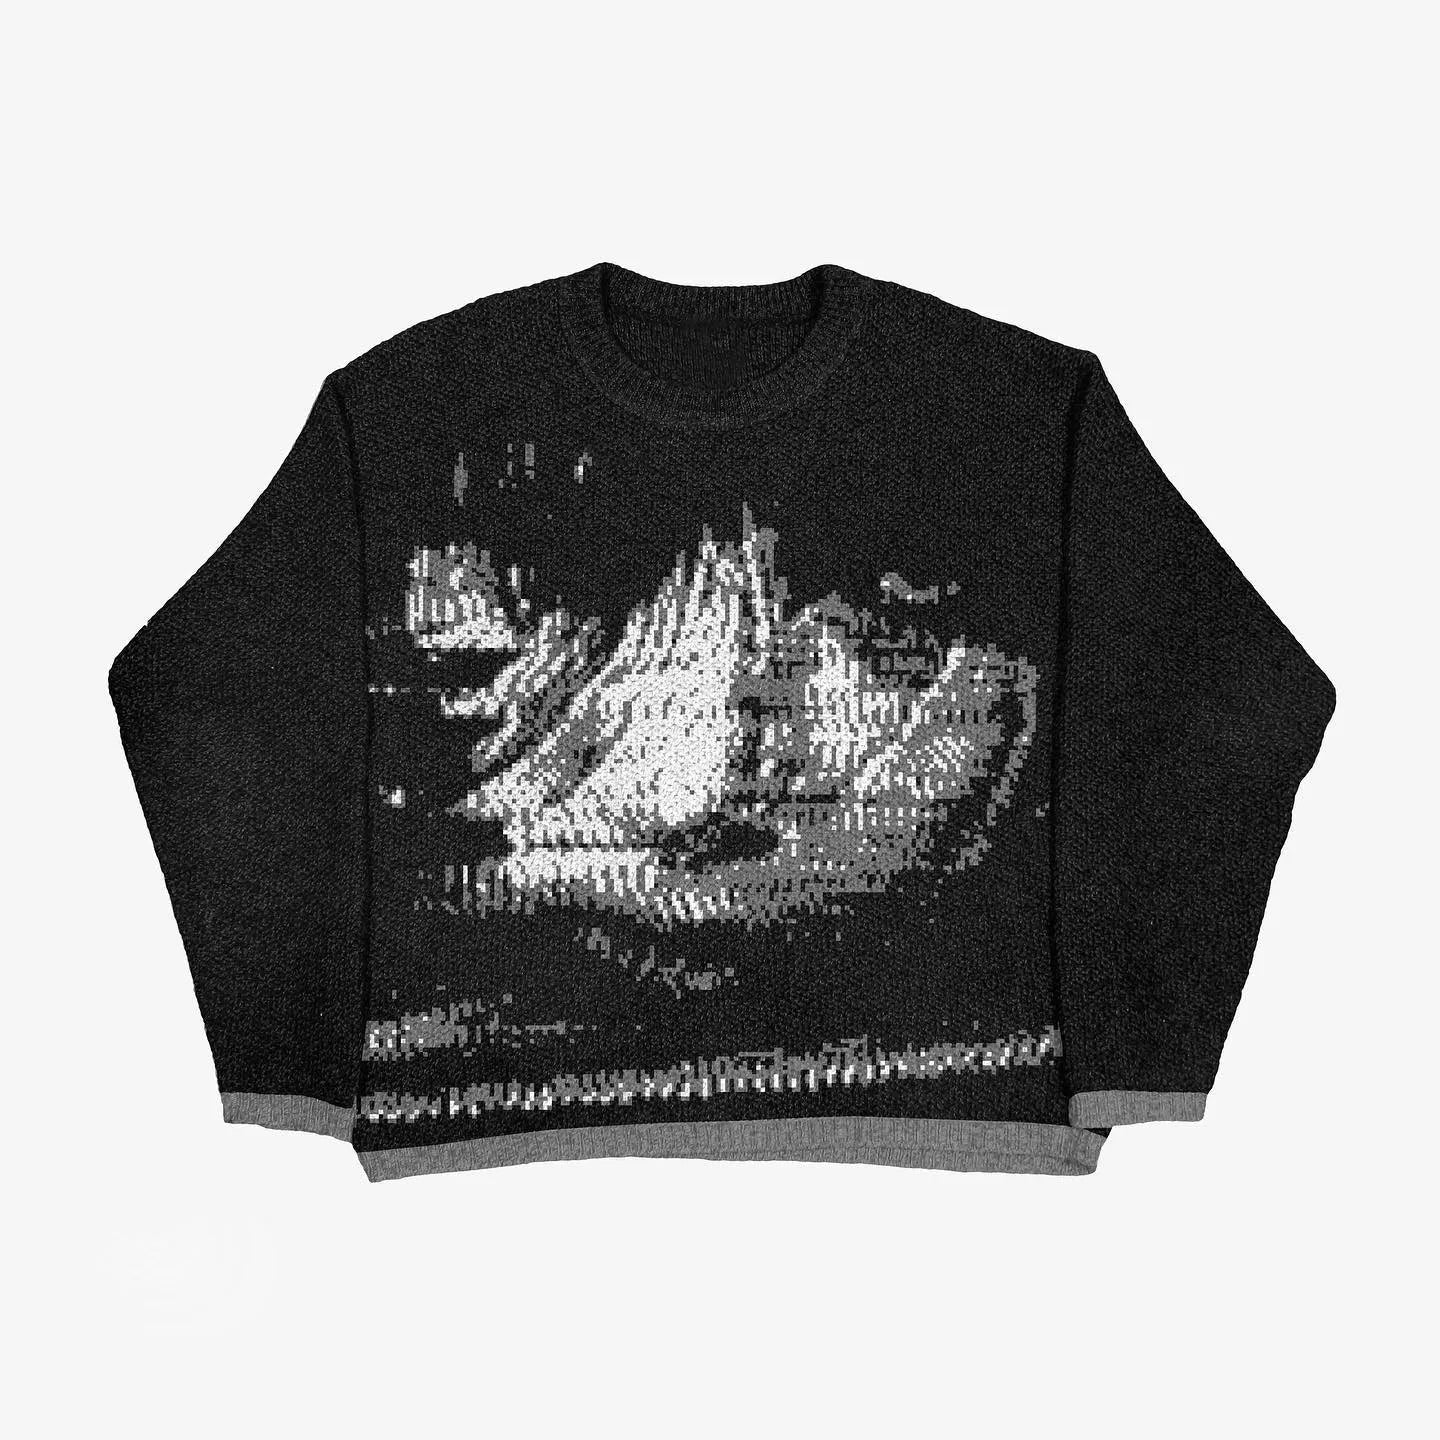 Japanese Hip Hop Knitted Sweater 22